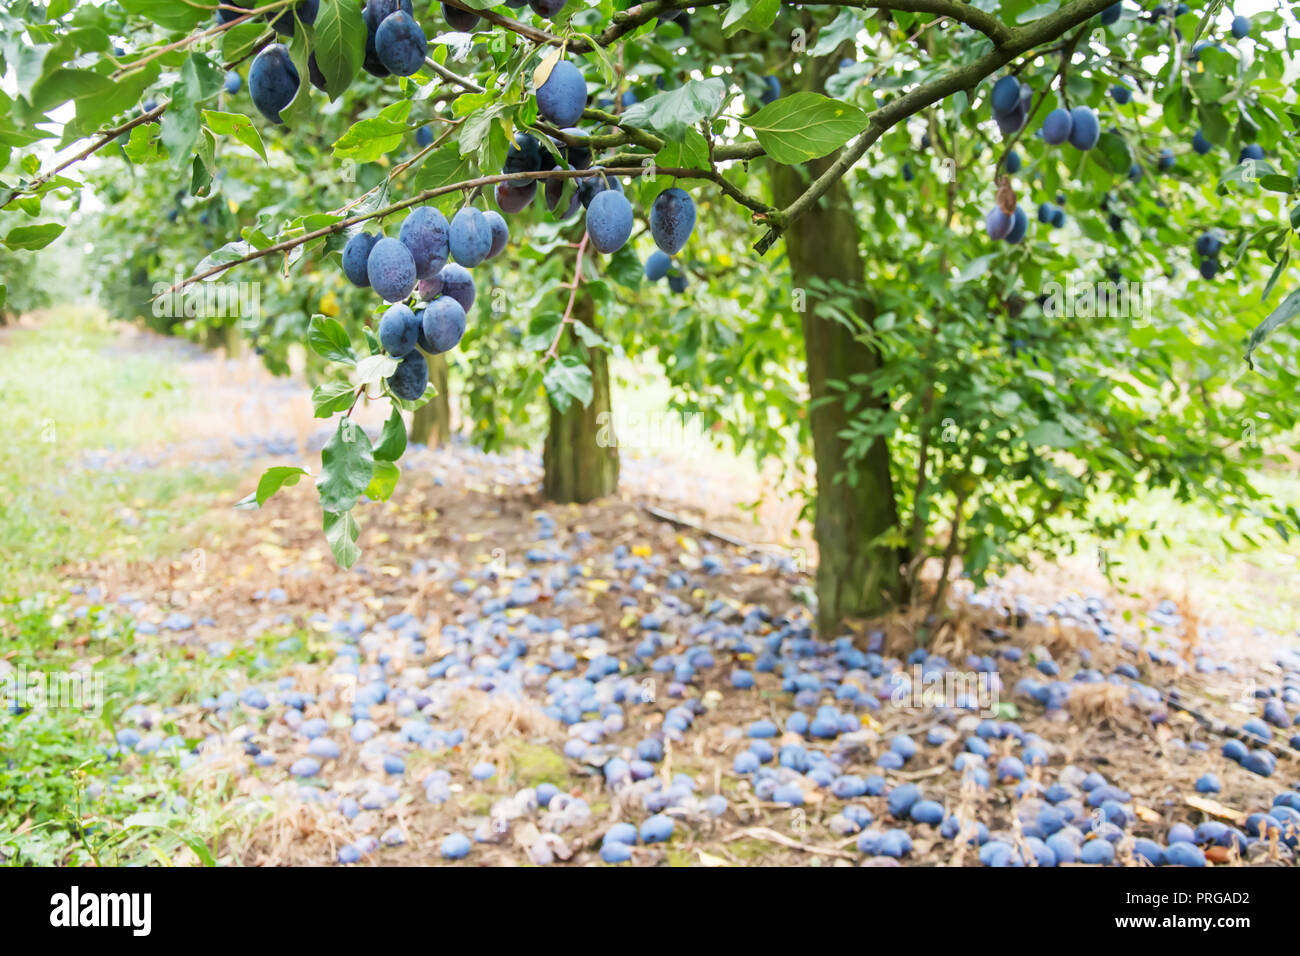 Windfall of blue common plums lying on the ground under a plum tree, branch with ripe plums at the foreground Stock Photo